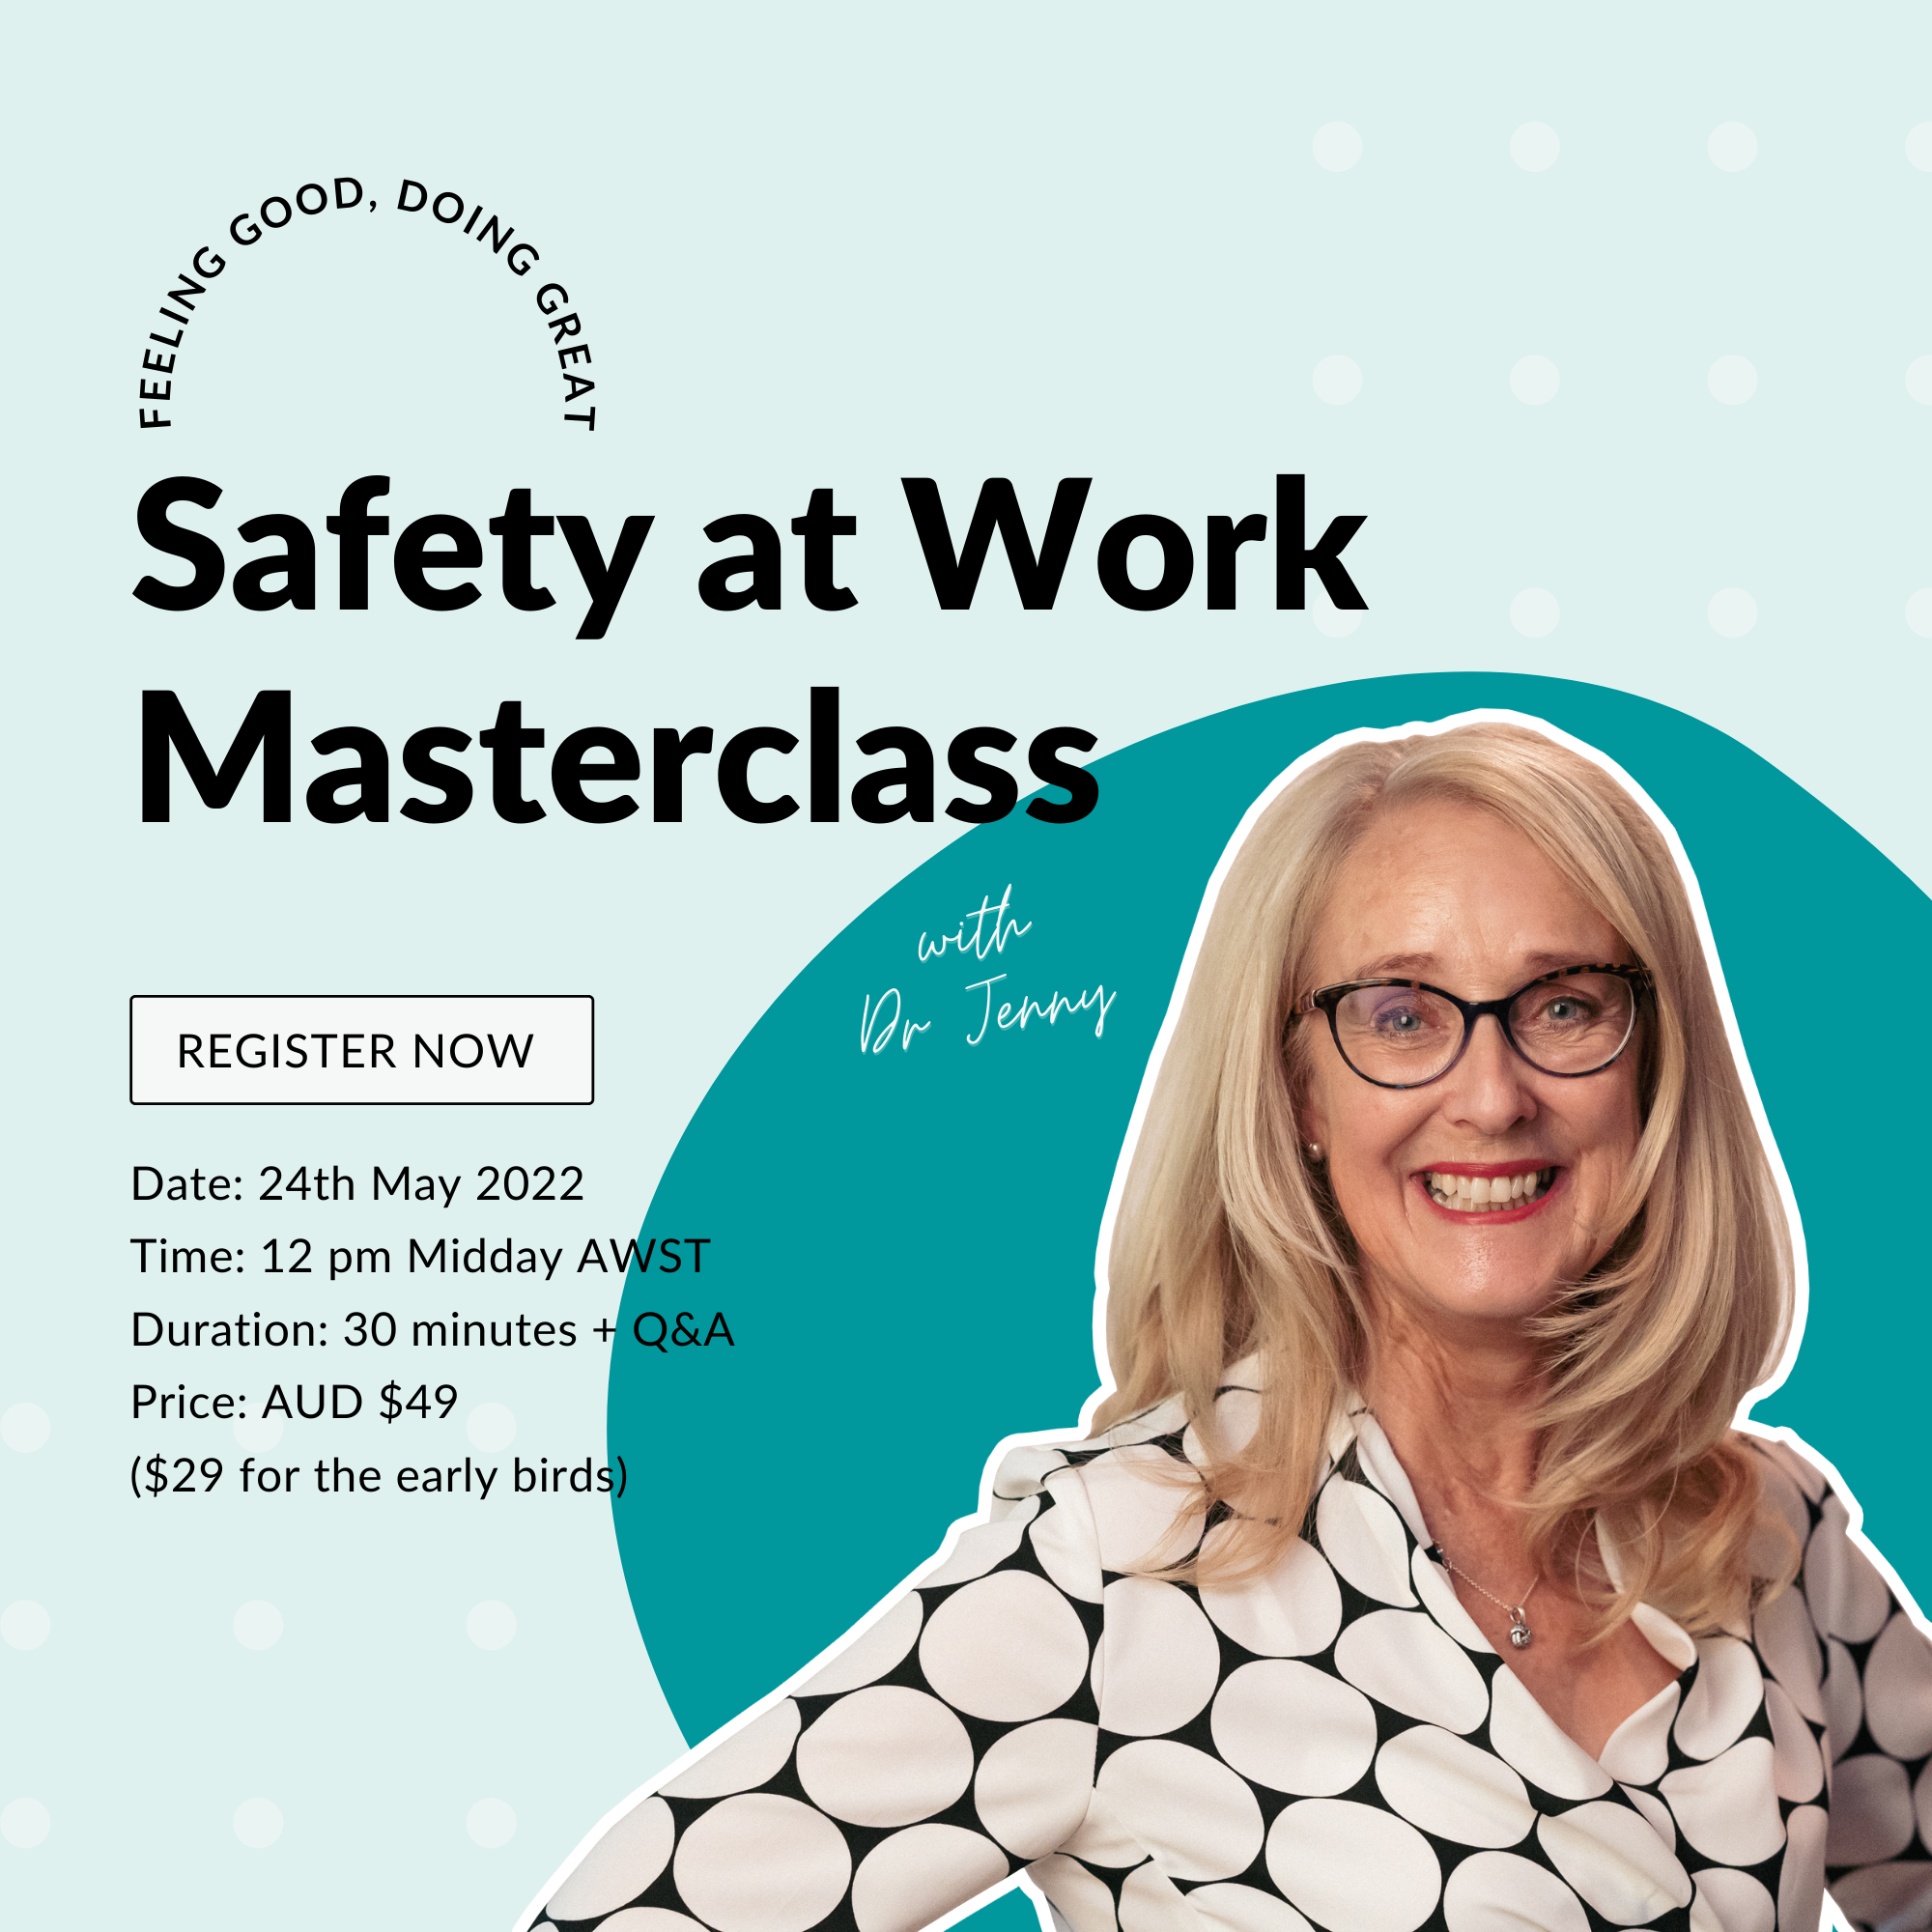 Safety at Work Masterclass